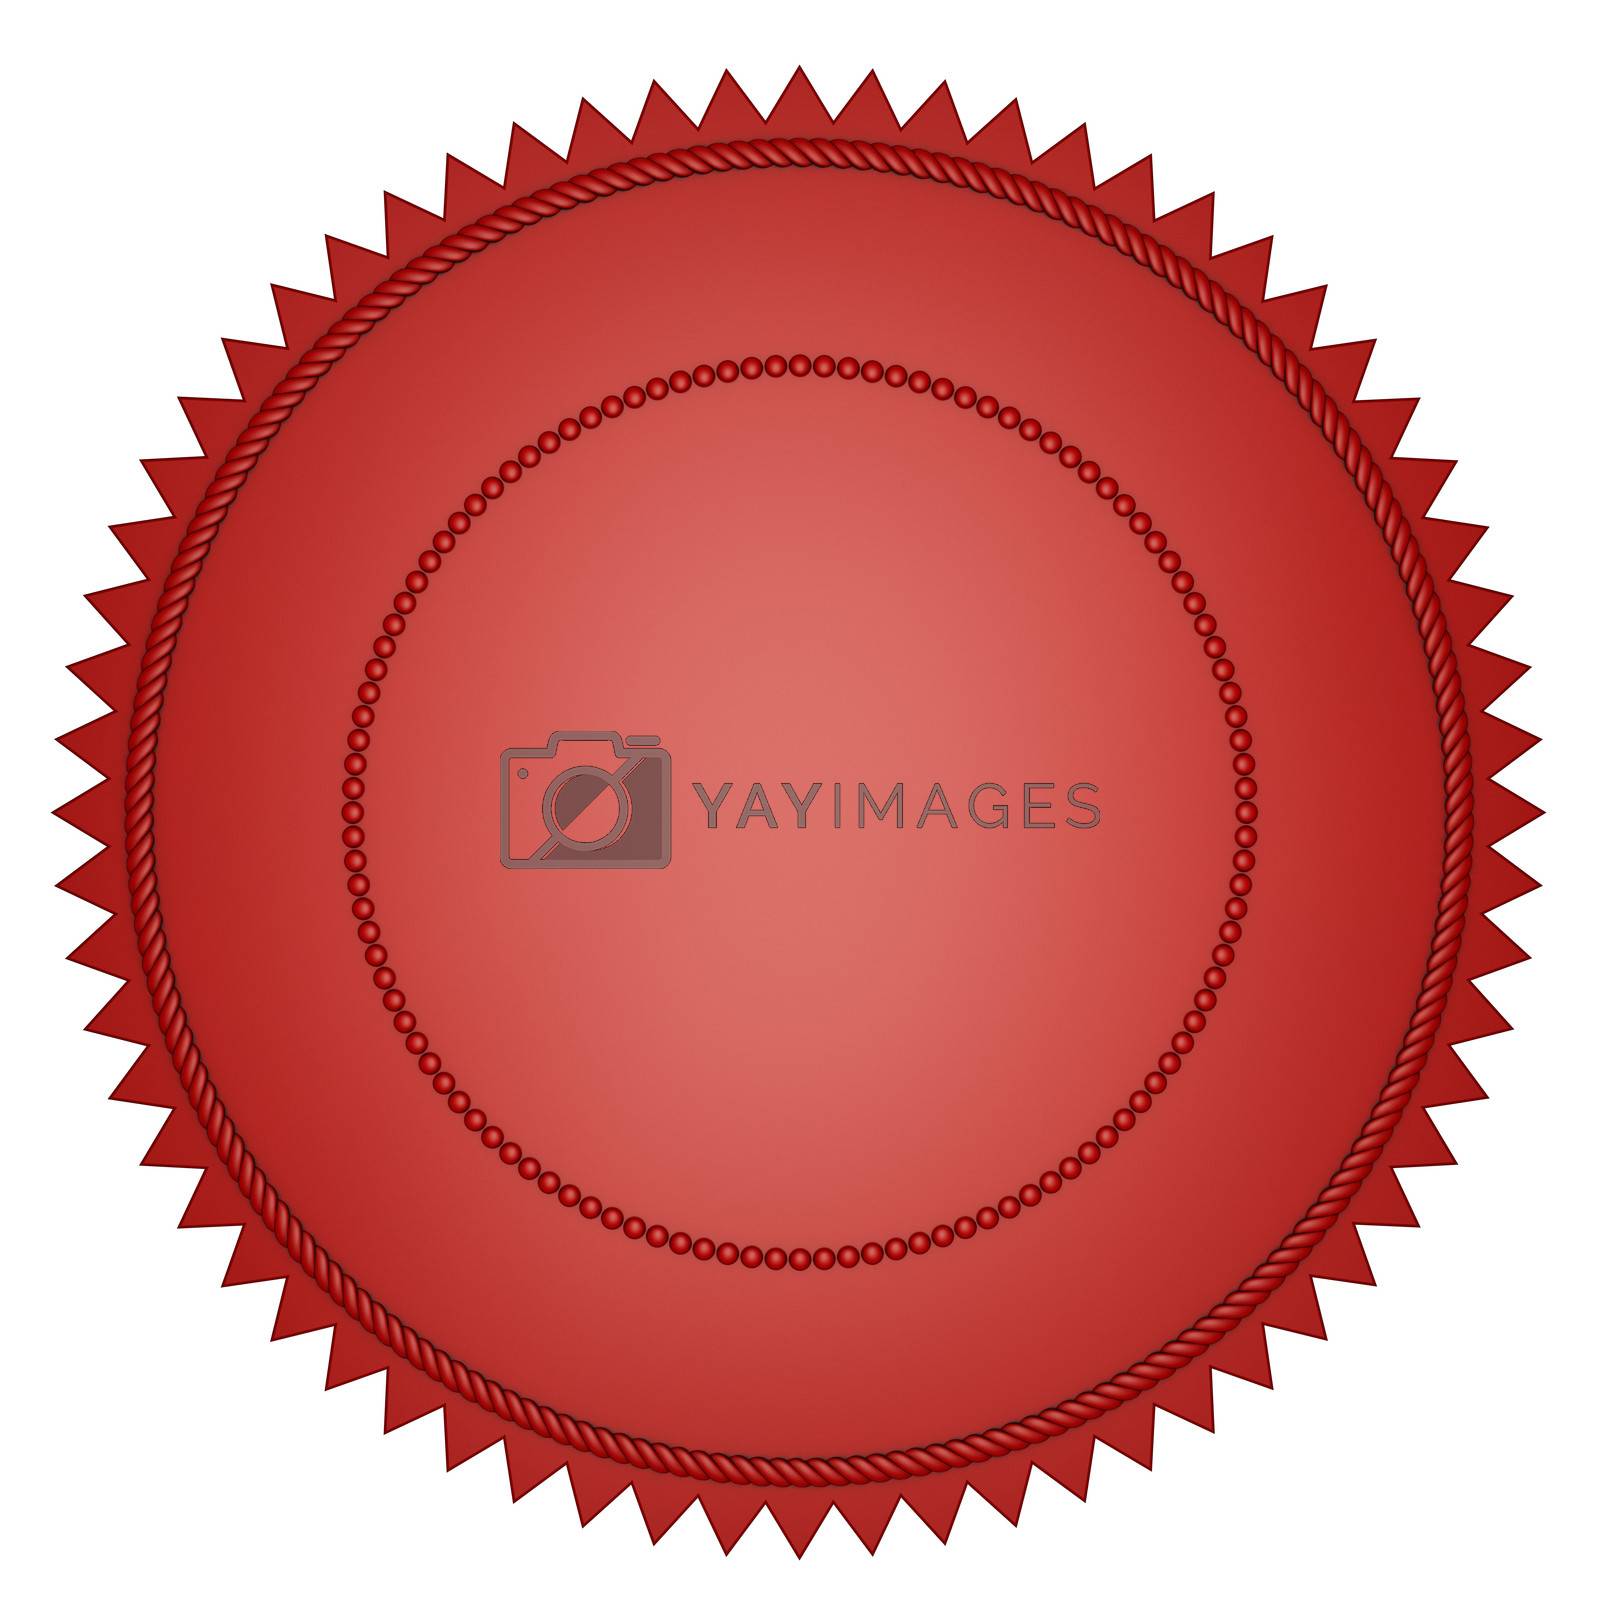 Royalty free image of Red Seal by ayzek